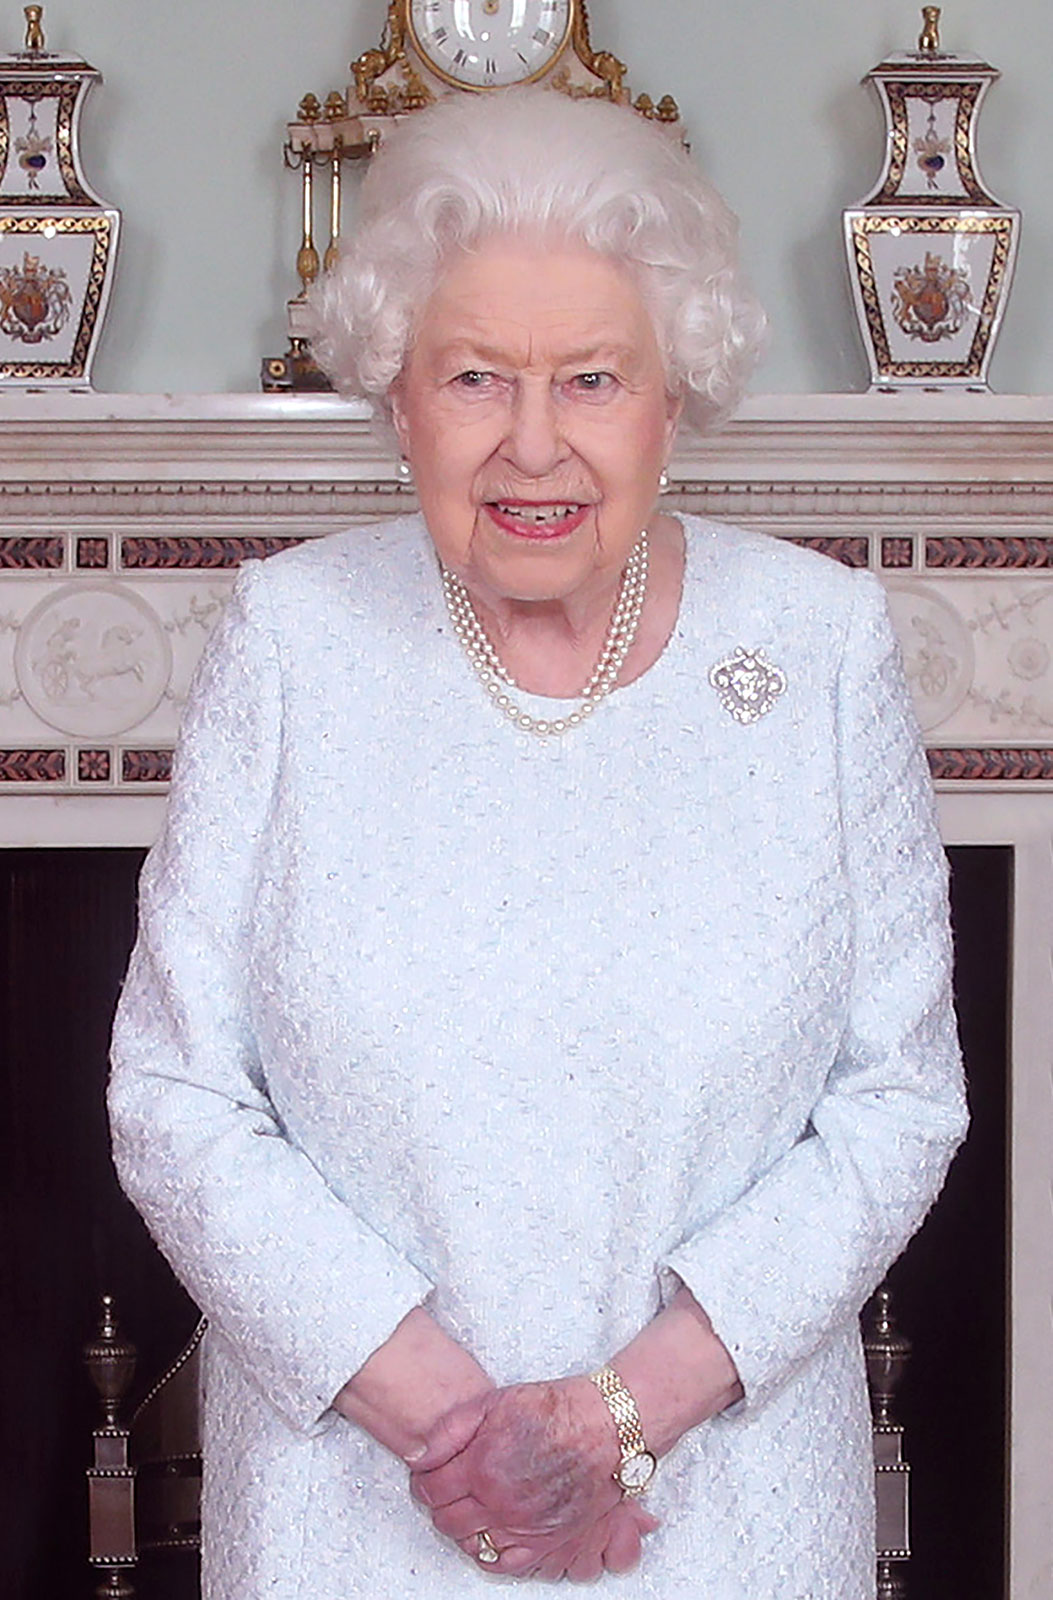 Ouch! Queen Elizabeth's Hand Is Completely Purple in New Photos | In ...